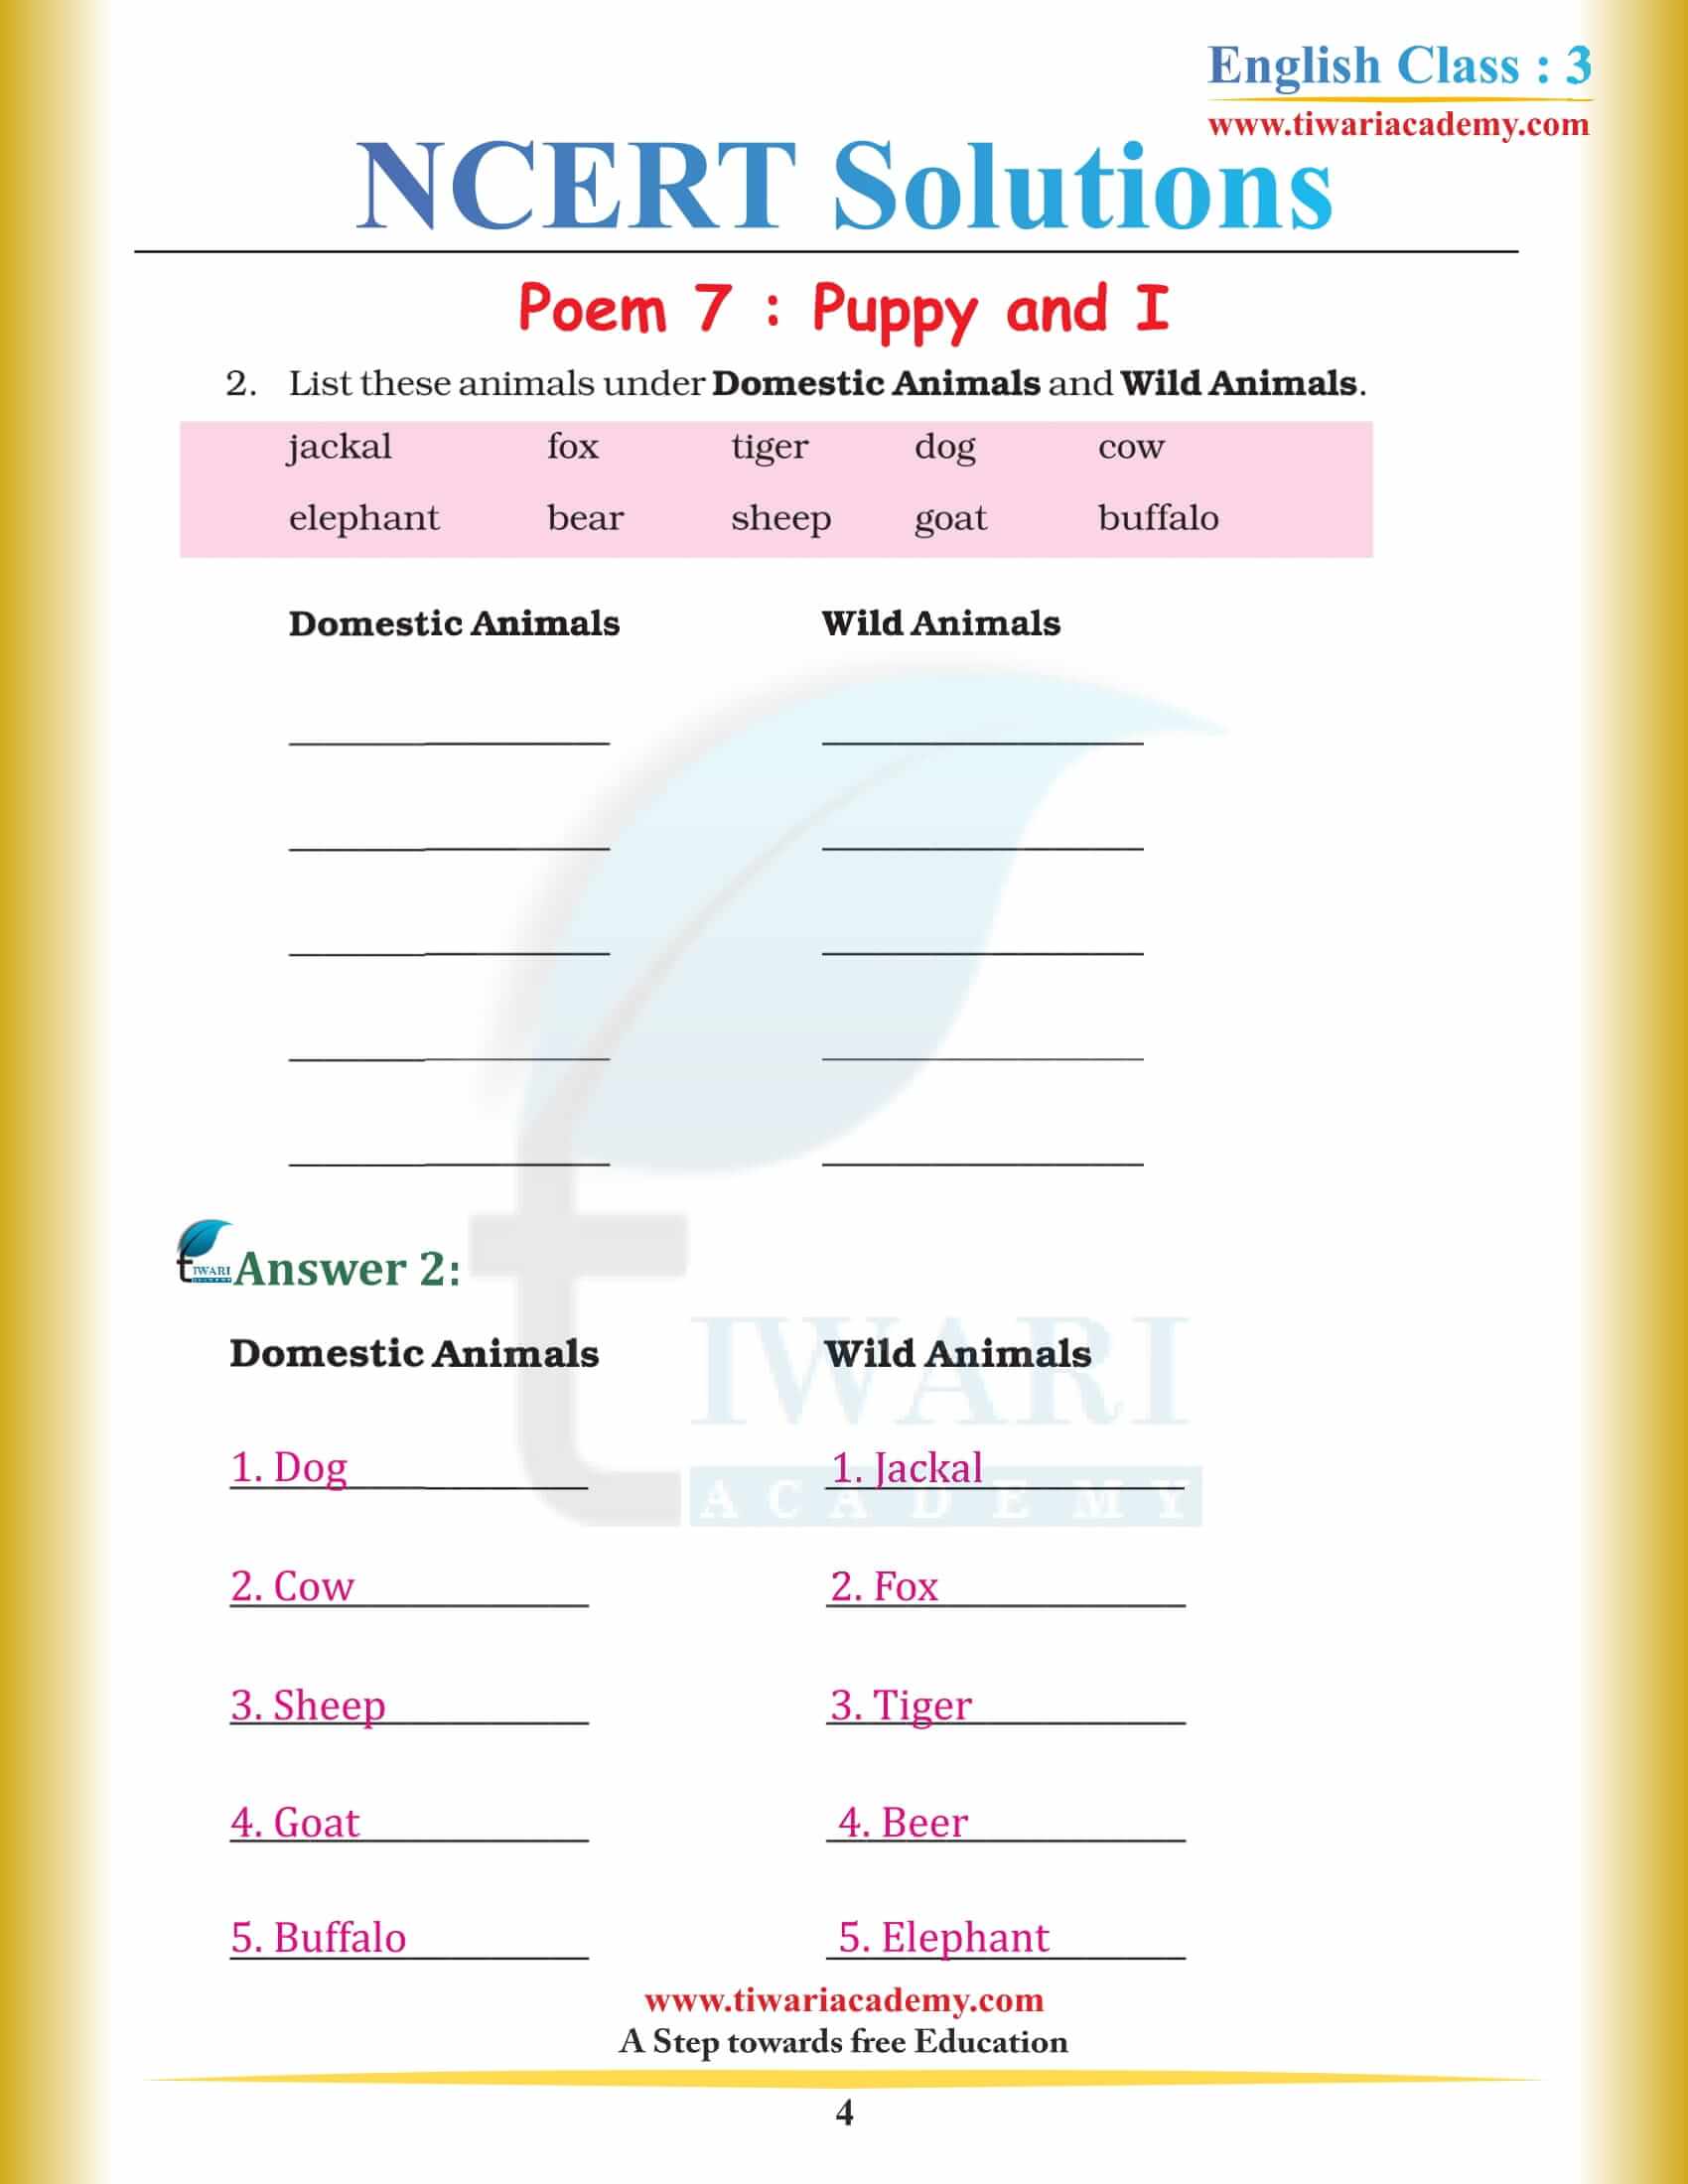 NCERT Solutions for Class 3 English Unit 7